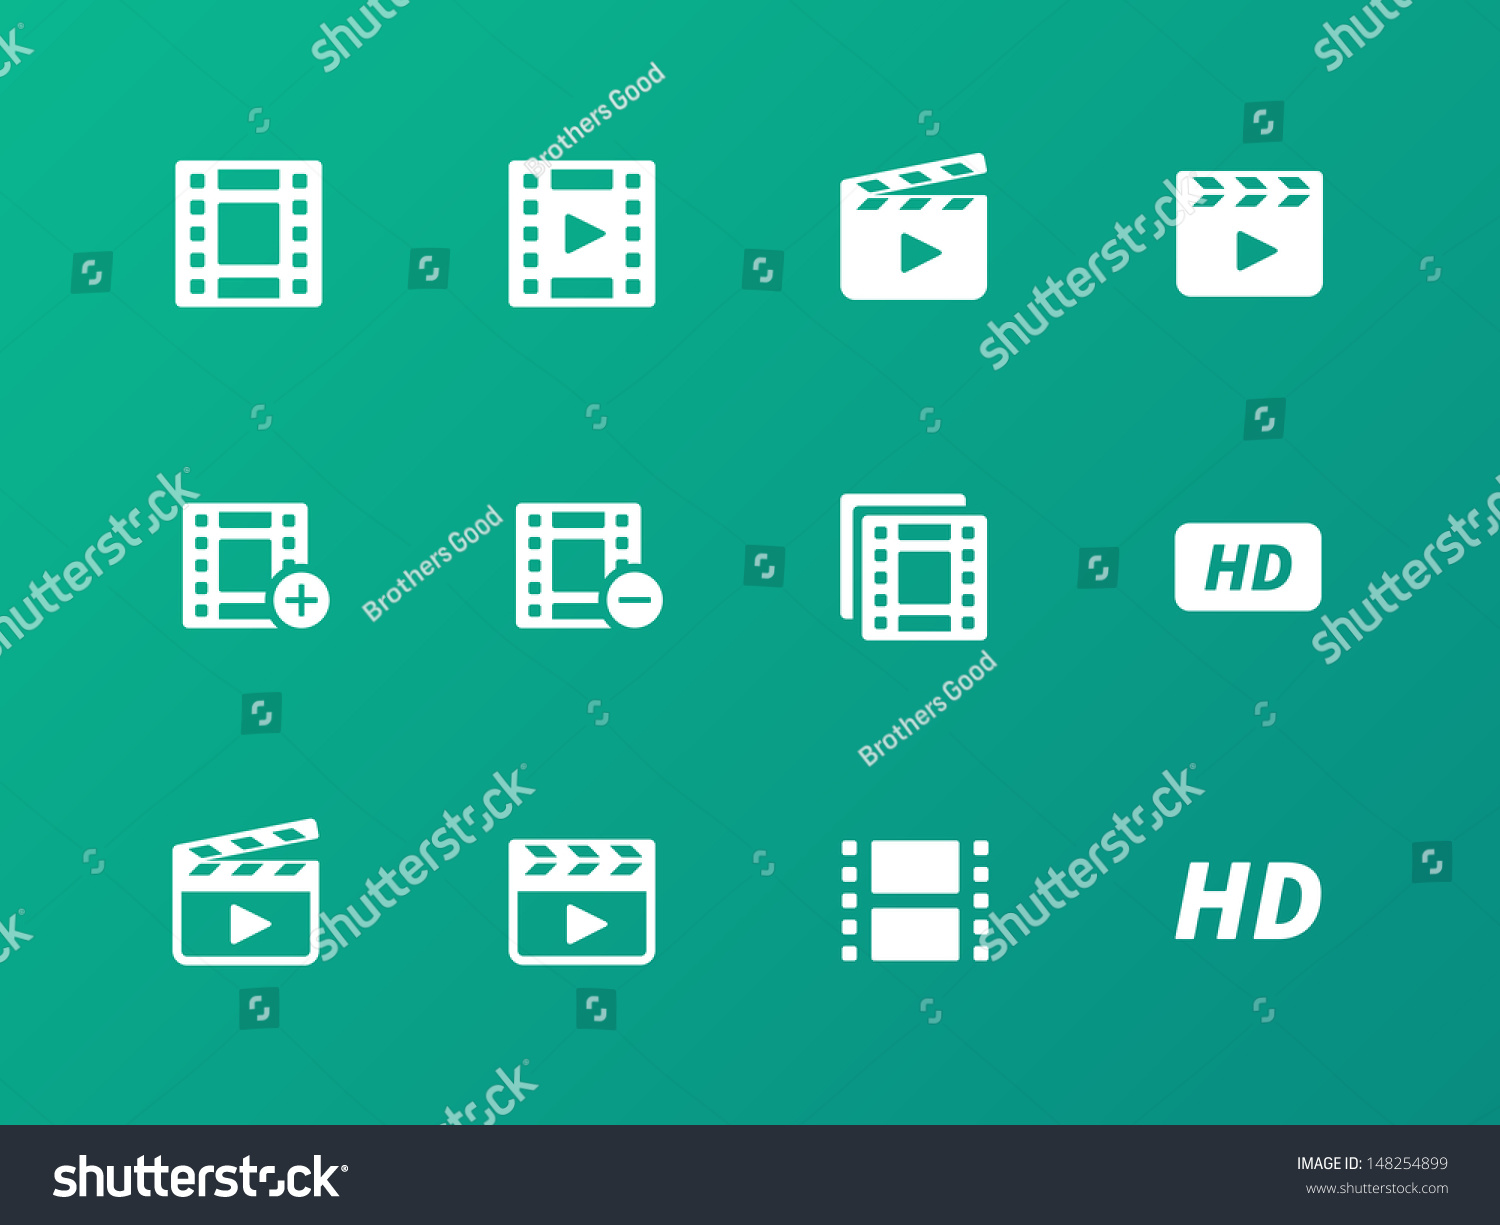 Video Icons On Green Background. Vector Illustration. - 148254899 ...